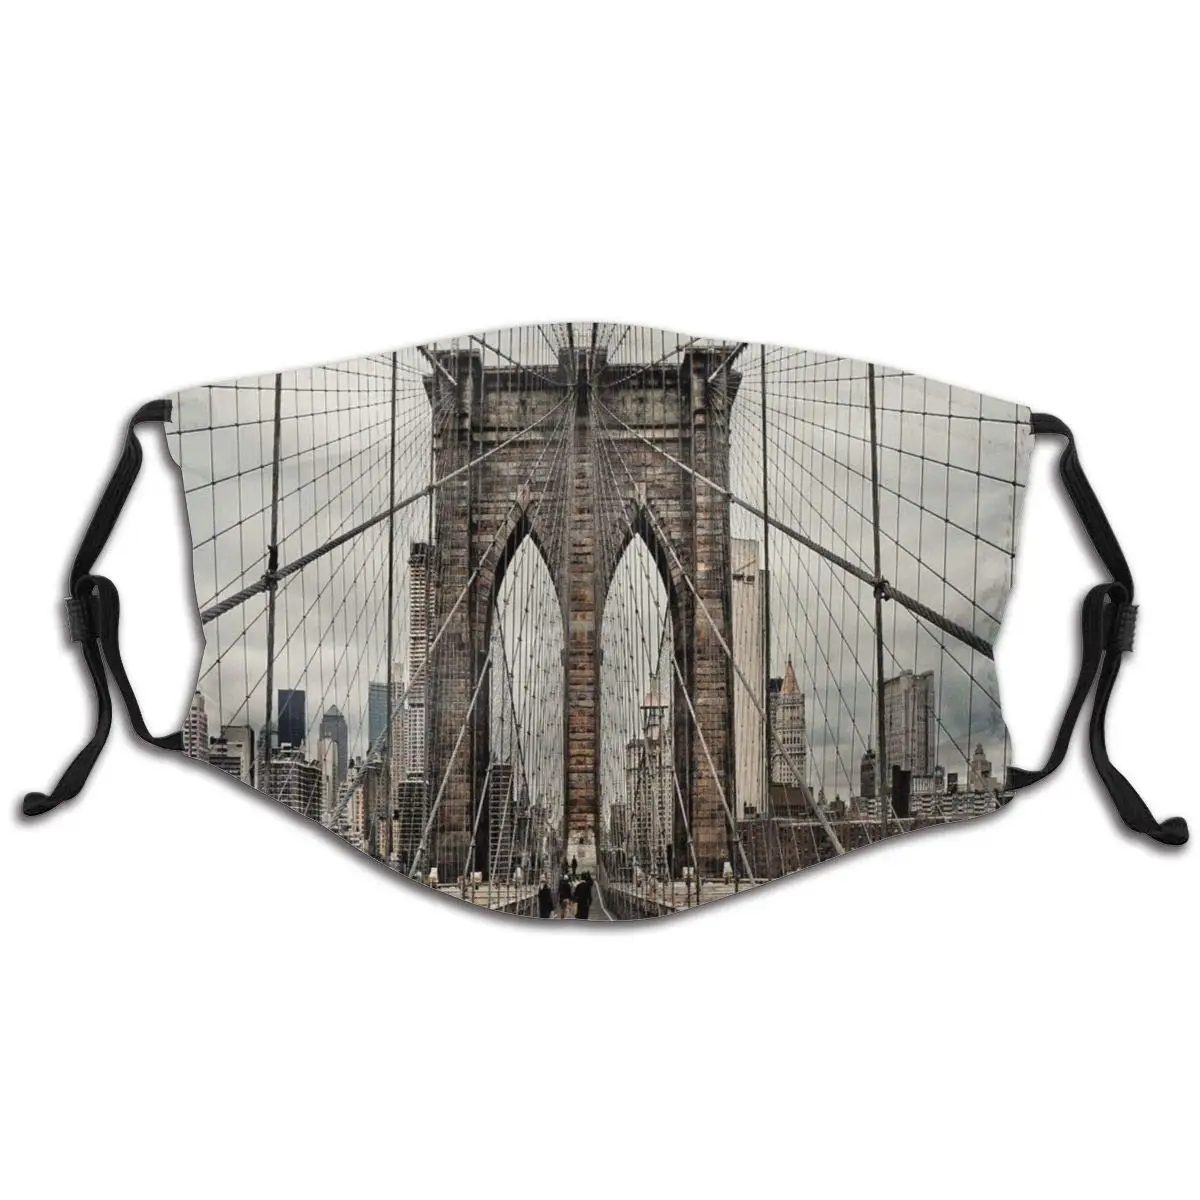 

Famous New York Building Brooklyn Bridge Reusable Face Mask PM2.5 Filter Child Adult Protective Mask Can Be Washed